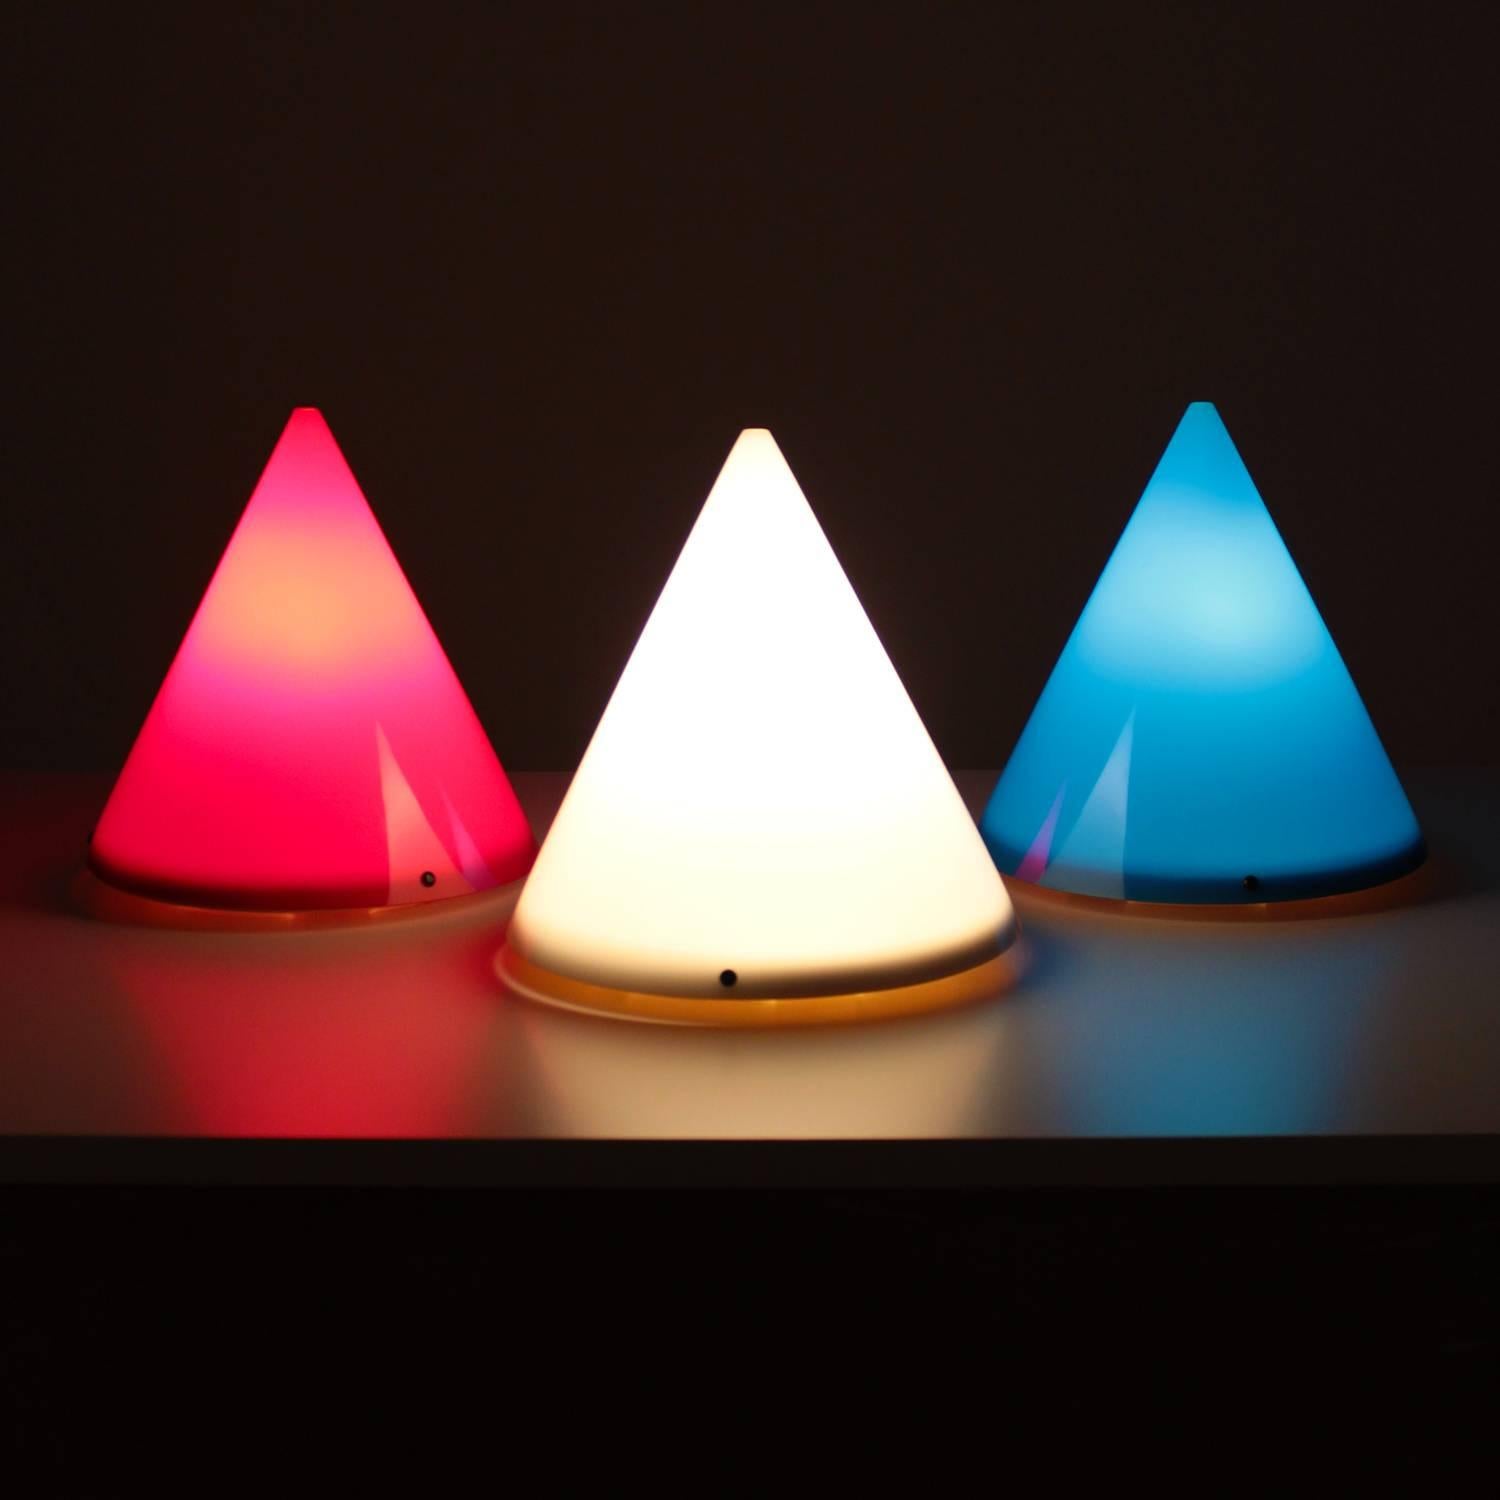 CONE LIGHTS, set of three wall lamps or table lamps, designed by Verner Panton and produced by the German Polythema in 1995 - ULTRA RARE set - only an estimated 1200 of these were produced!

The Cone lamp is cast in acrylic and features a thin